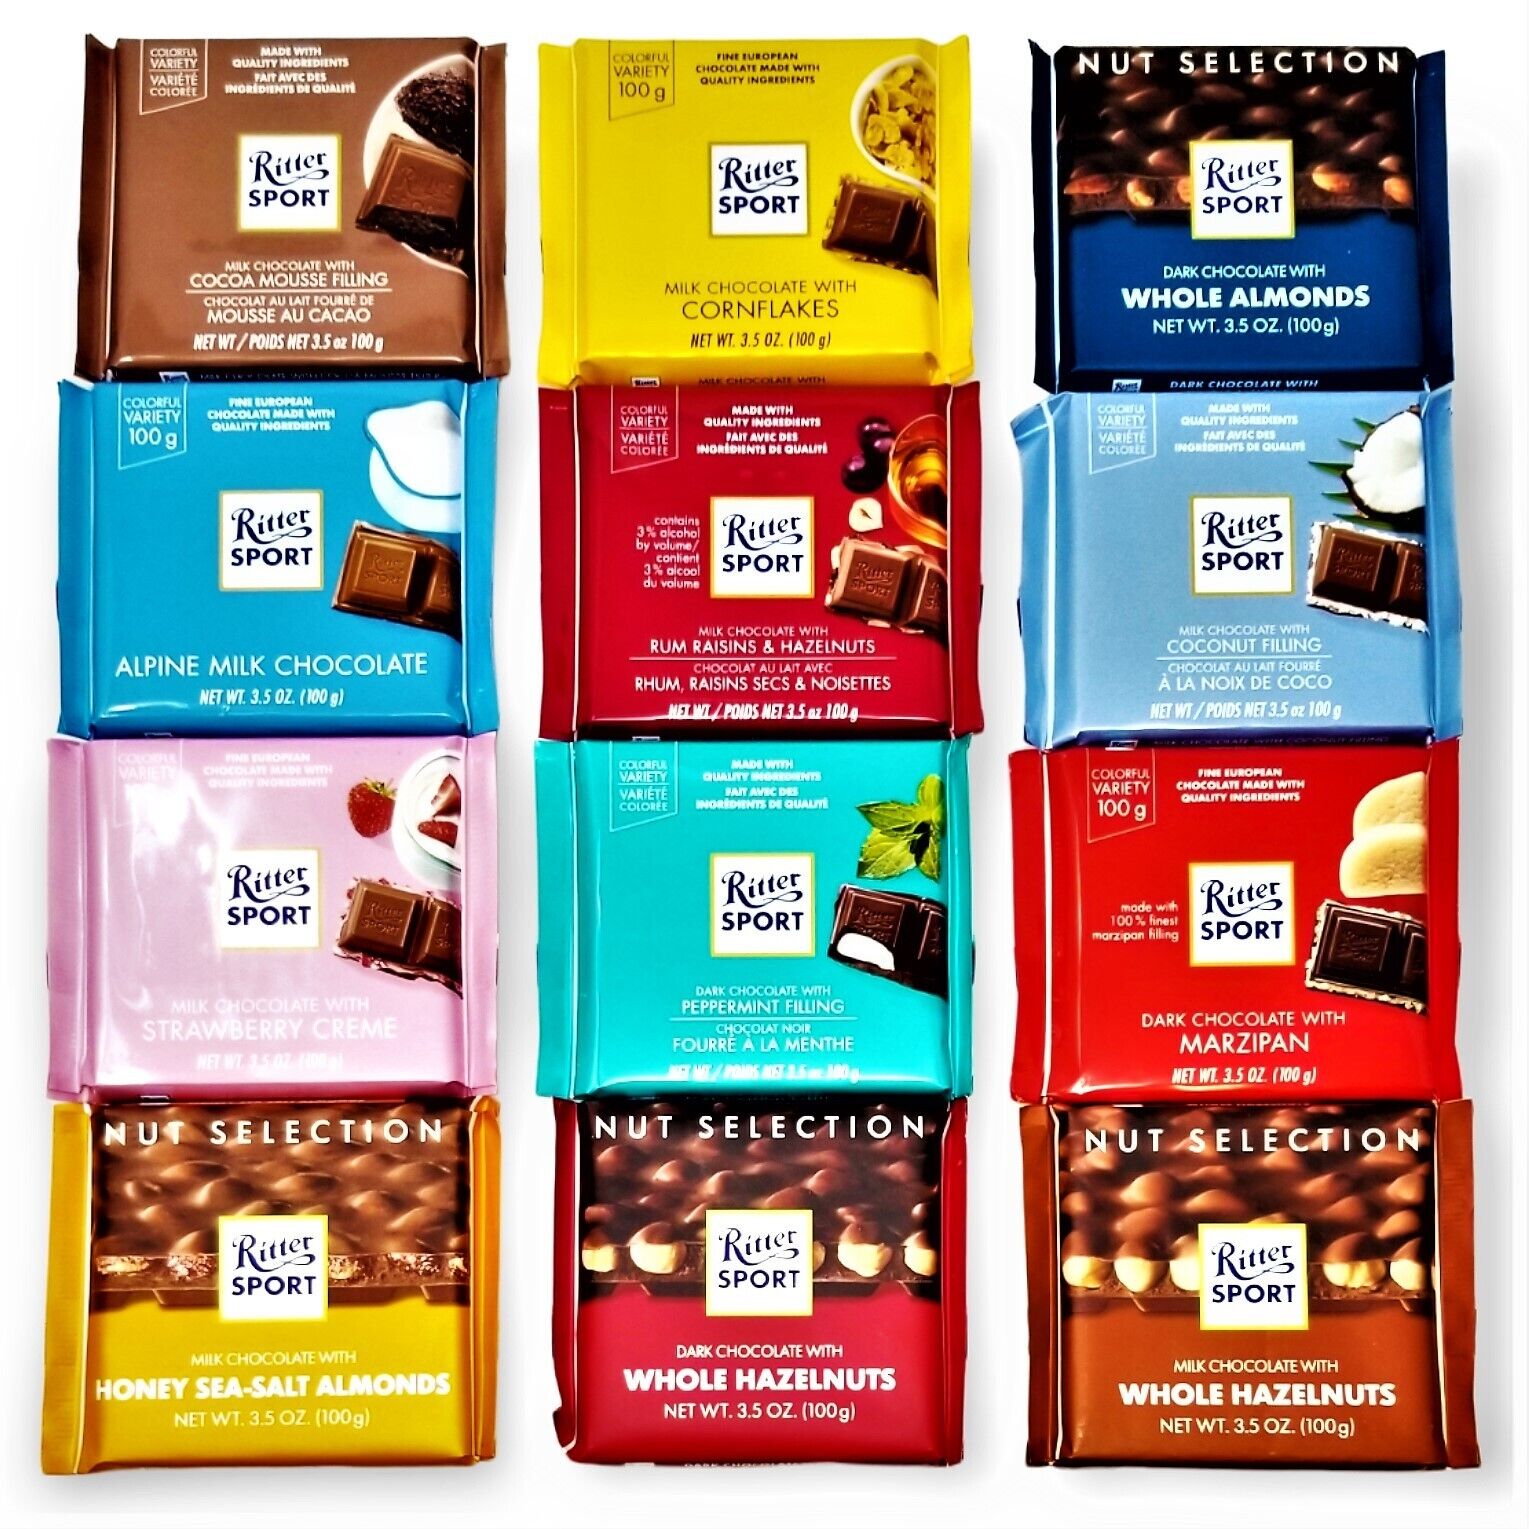 12-PACK - Ritter Sport Assorted Chocolates - Randomly Selected Variety, 100g Ea. Ritter Sport Does not apply